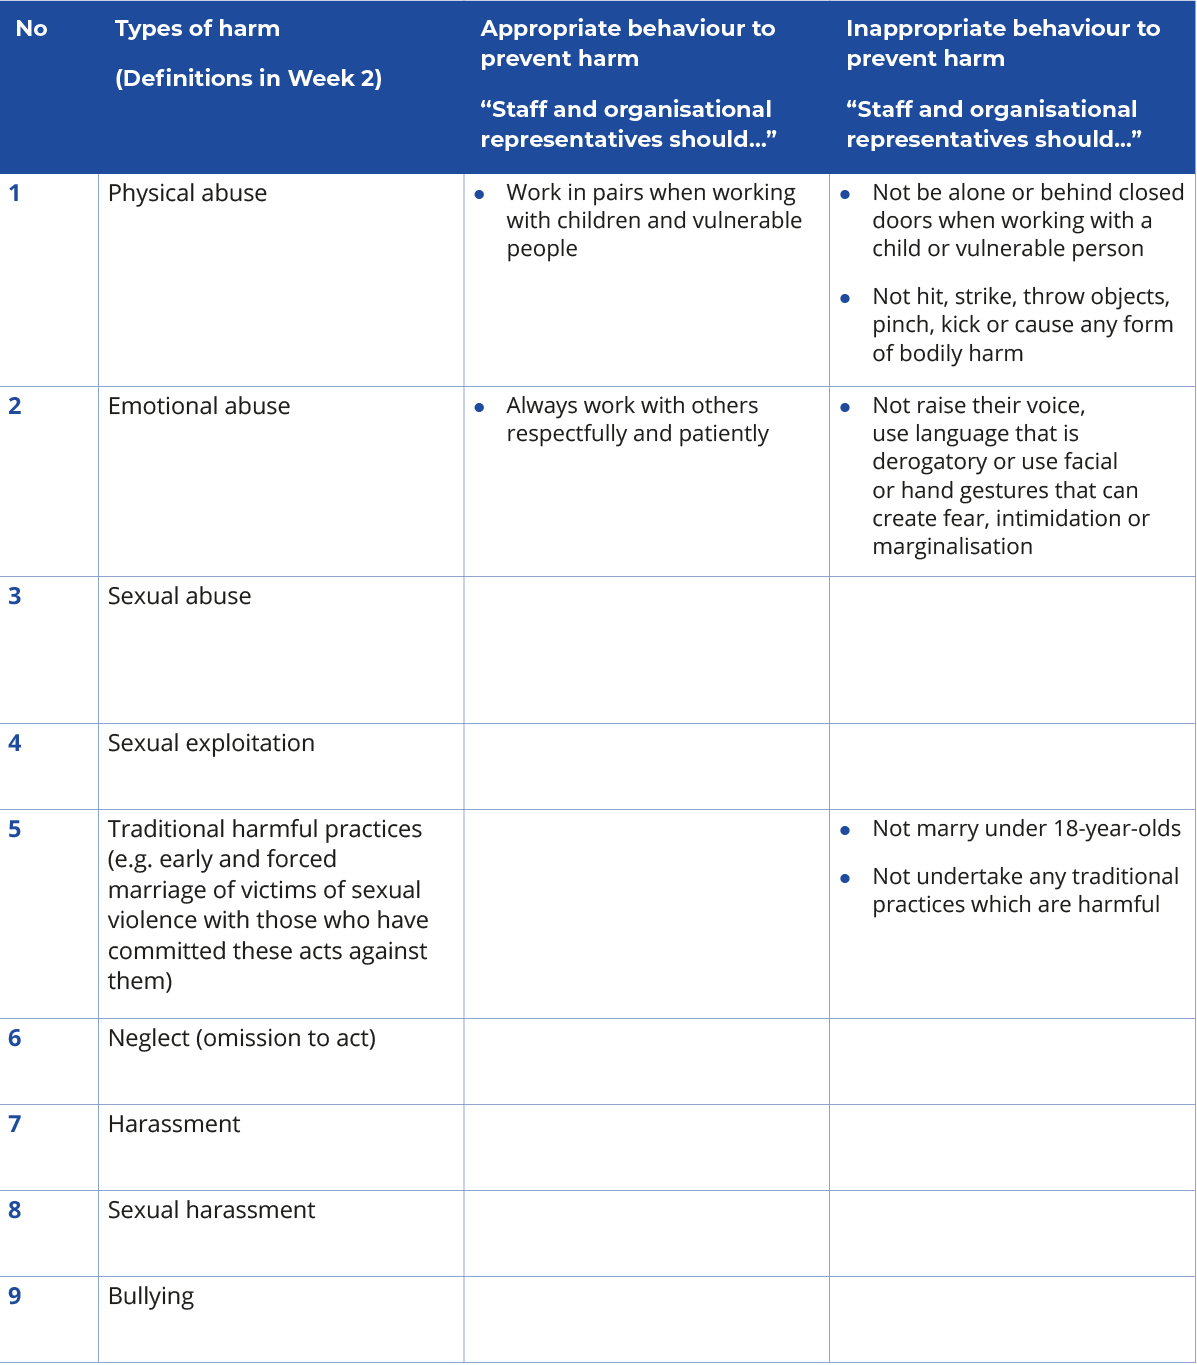 This is a table detailing what is appropriate and inappropriate behaviour. There is an accessible PDF version of this table available in the downloads area.